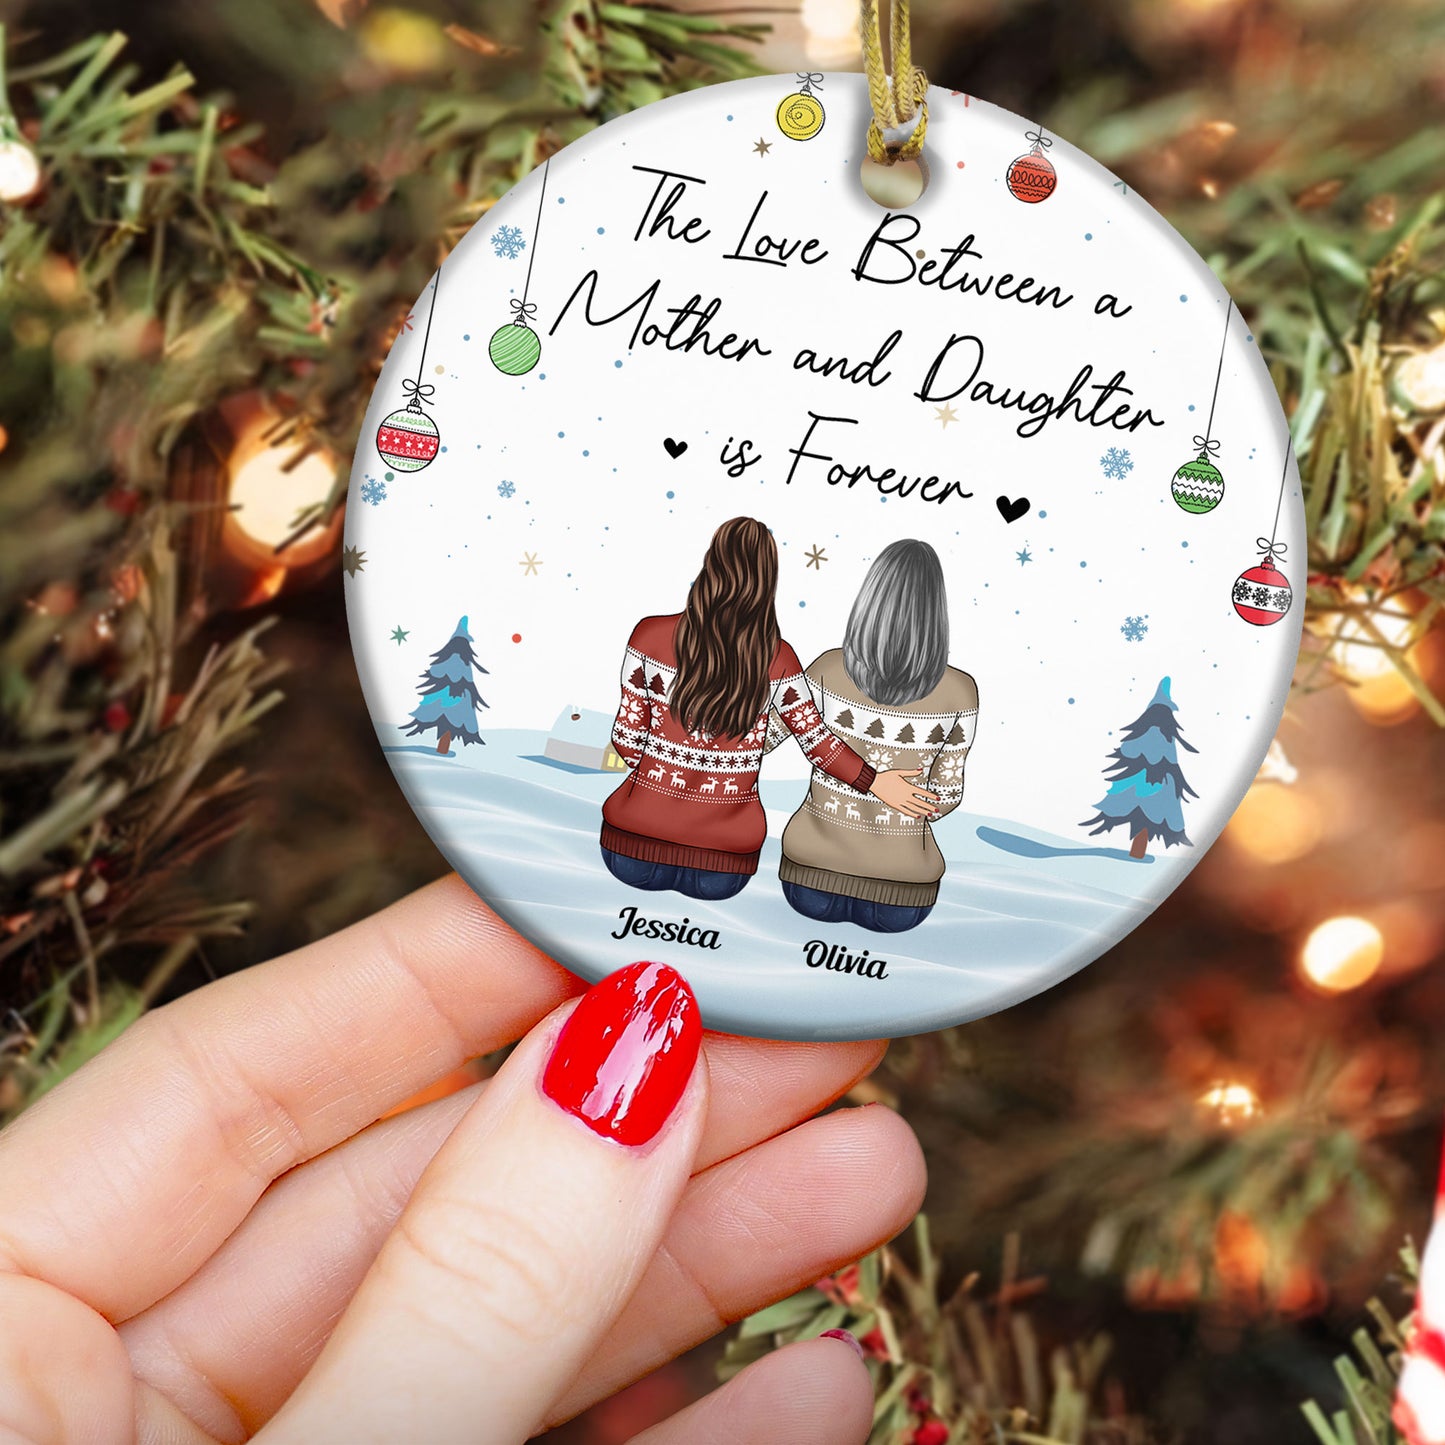 The Love Between A Mother And Daughter Is Forever - Personalized Ceramic Ornament - Christmas, Loving Gift For Mother, Mom, Nana, Daughters, Son, Children